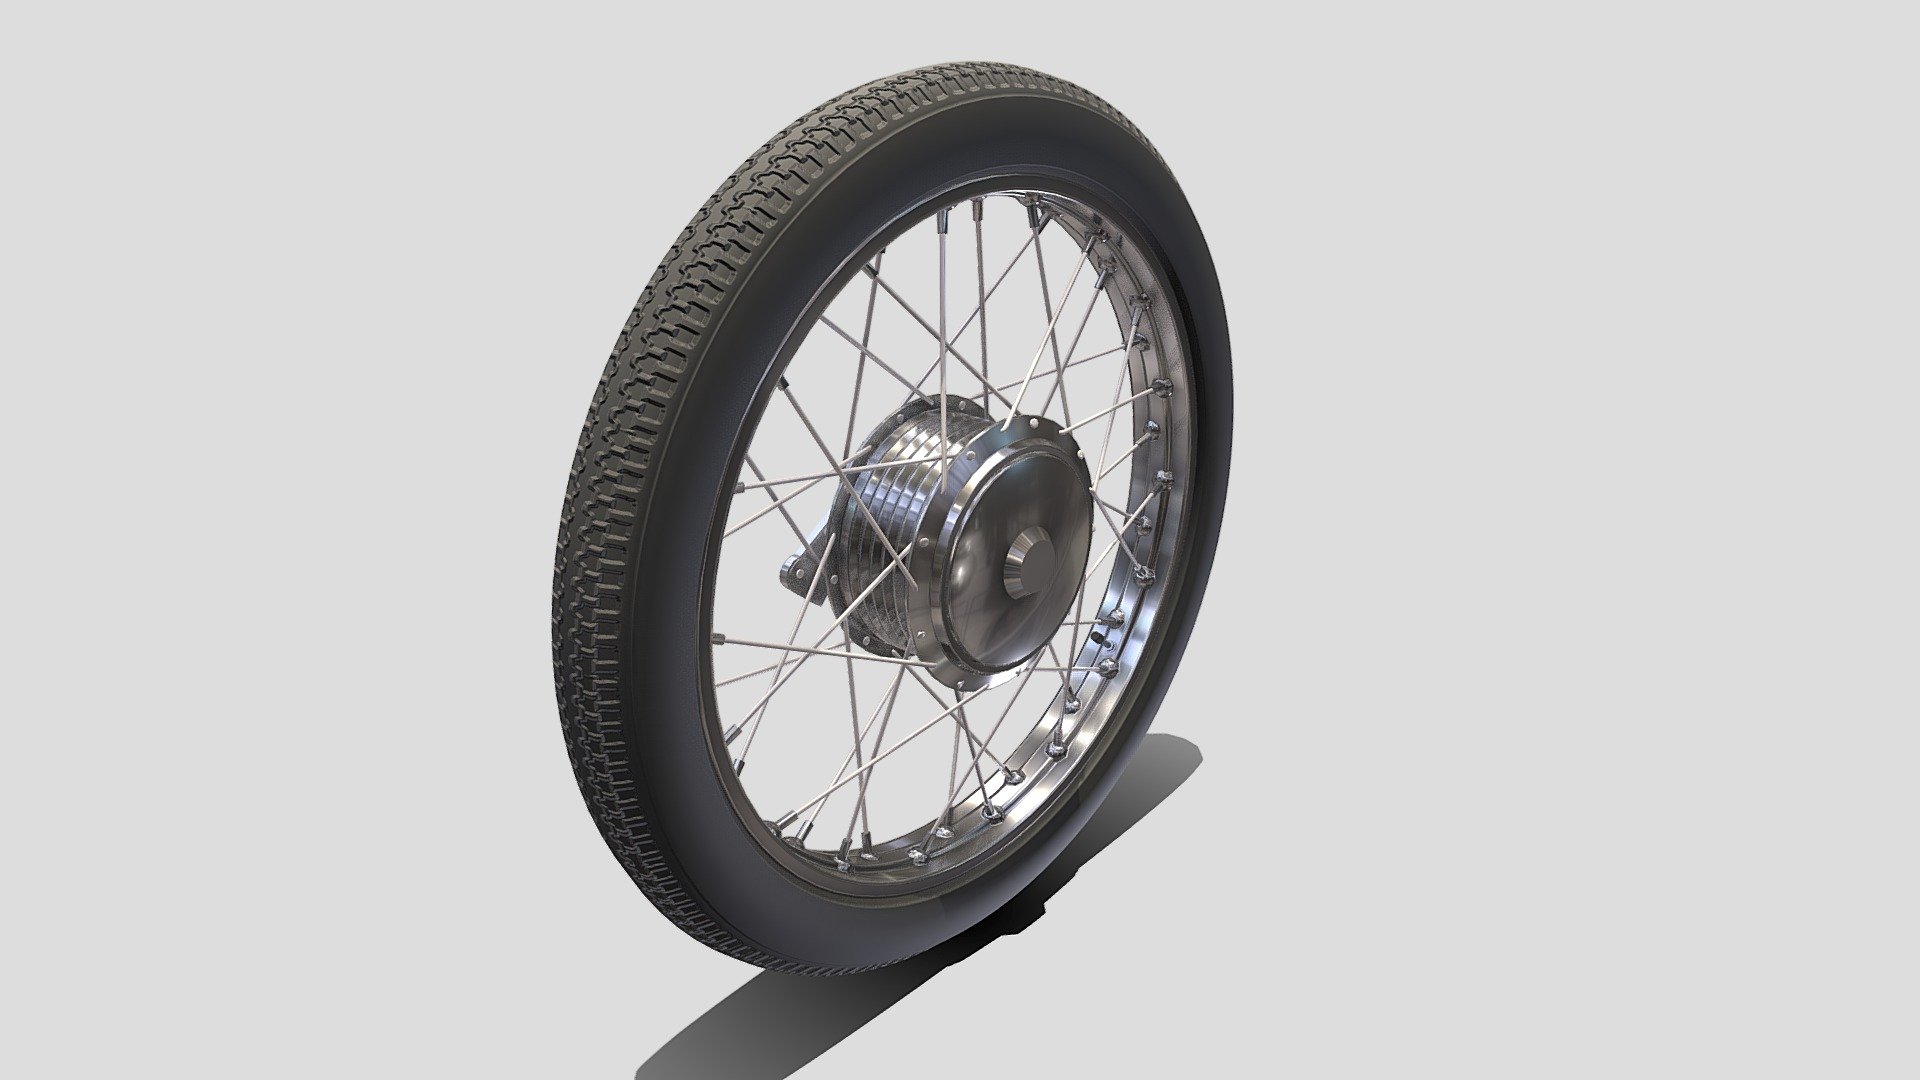 Moped wheel 3d model rendered with Cycles in Blender, as per seen on attached images. 
The 3d model is scaled to original size in Blender.

File formats:
-.blend, rendered with cycles, as seen in the images;
-.obj, with materials applied;
-.dae, with materials applied;
-.fbx, with materials applied;
-.stl;

Files come named appropriately and split by file format.

3D Software:
The 3D model was originally created in Blender 2.8 and rendered with Cycles.

Materials and textures:
The model contains one png image texture for the bump effect.
The models have materials applied in all formats, and are ready to import and render, note that some minimal adjsutments might be needed to look best in the renderer of choice.

Preview scenes:
The preview images are rendered in Blender using its built-in render engine &lsquo;Cycles'.
Note that the blend files come directly with the rendering scene included and the render command will generate the exact result as seen in previews.

Don't forget to rate and enjoy! - Moped wheel low poly - Buy Royalty Free 3D model by dragosburian 3d model